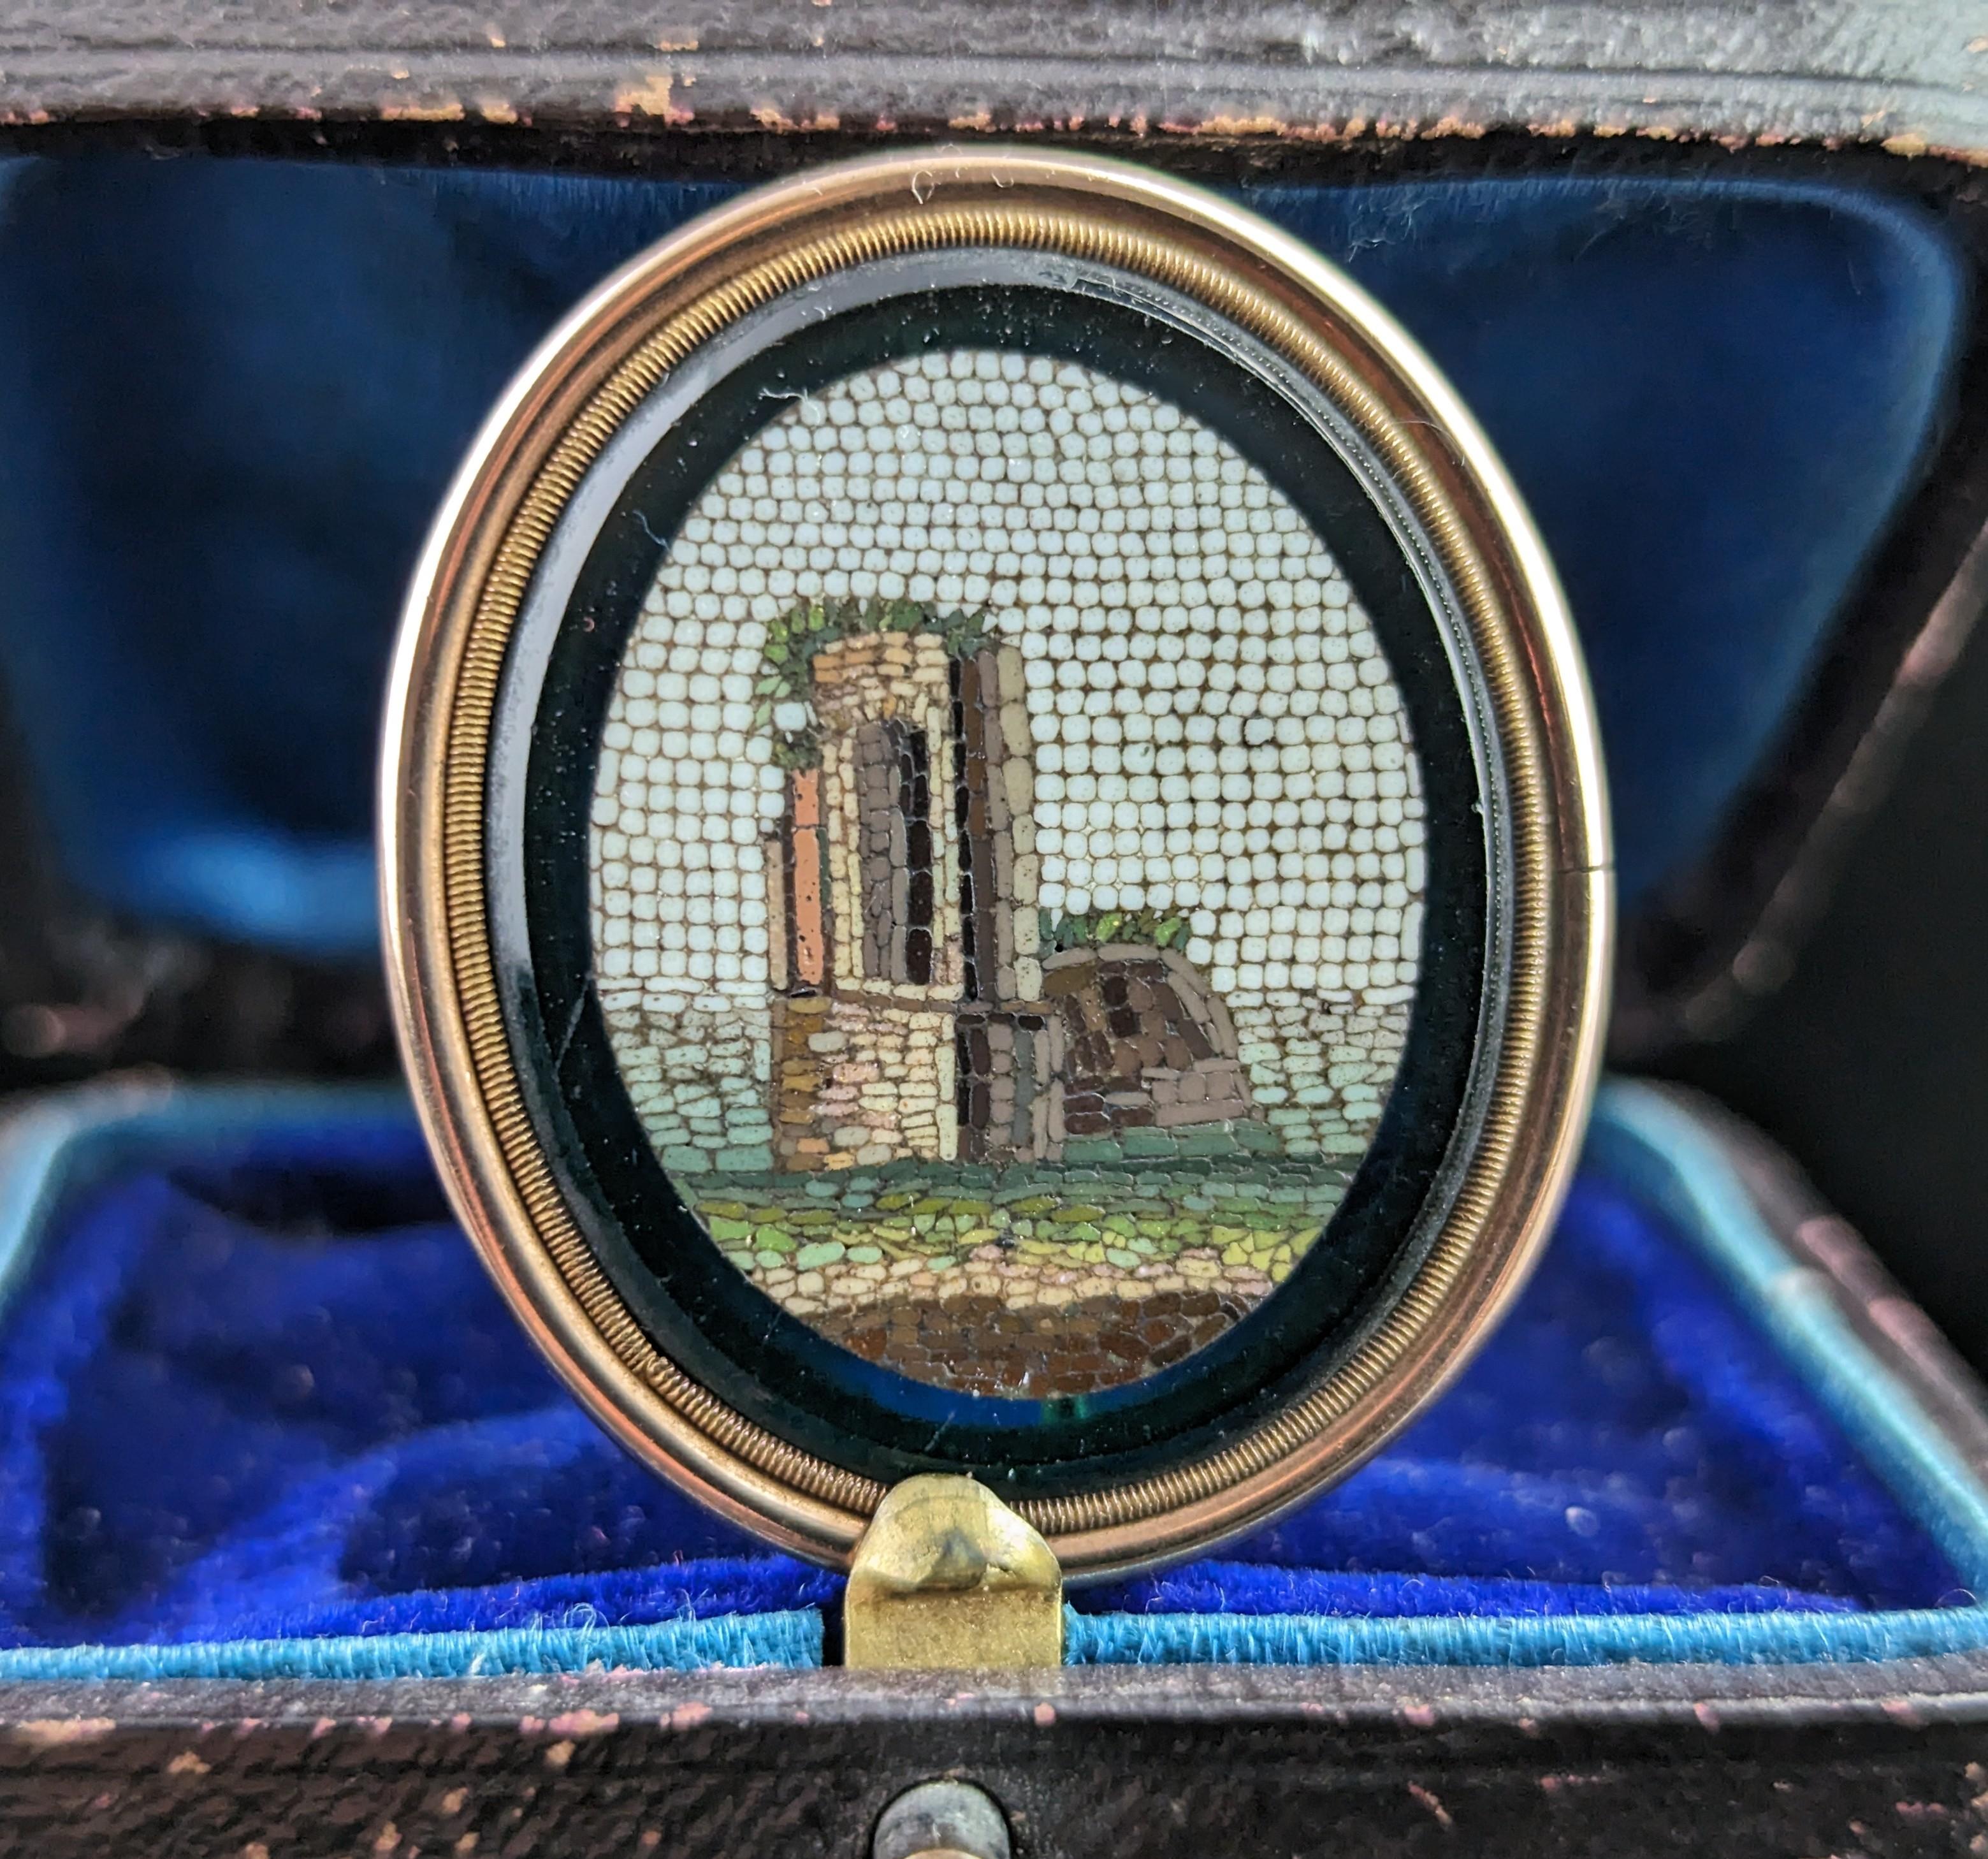 The charm and wonder of antique micro mosaics is second to none.

This antique Micro Mosaic brooch is an early 19th century, Georgian Grand Tour piece, designed for the tourist market in Italy that boomed in the era.

The brooch is made up with a